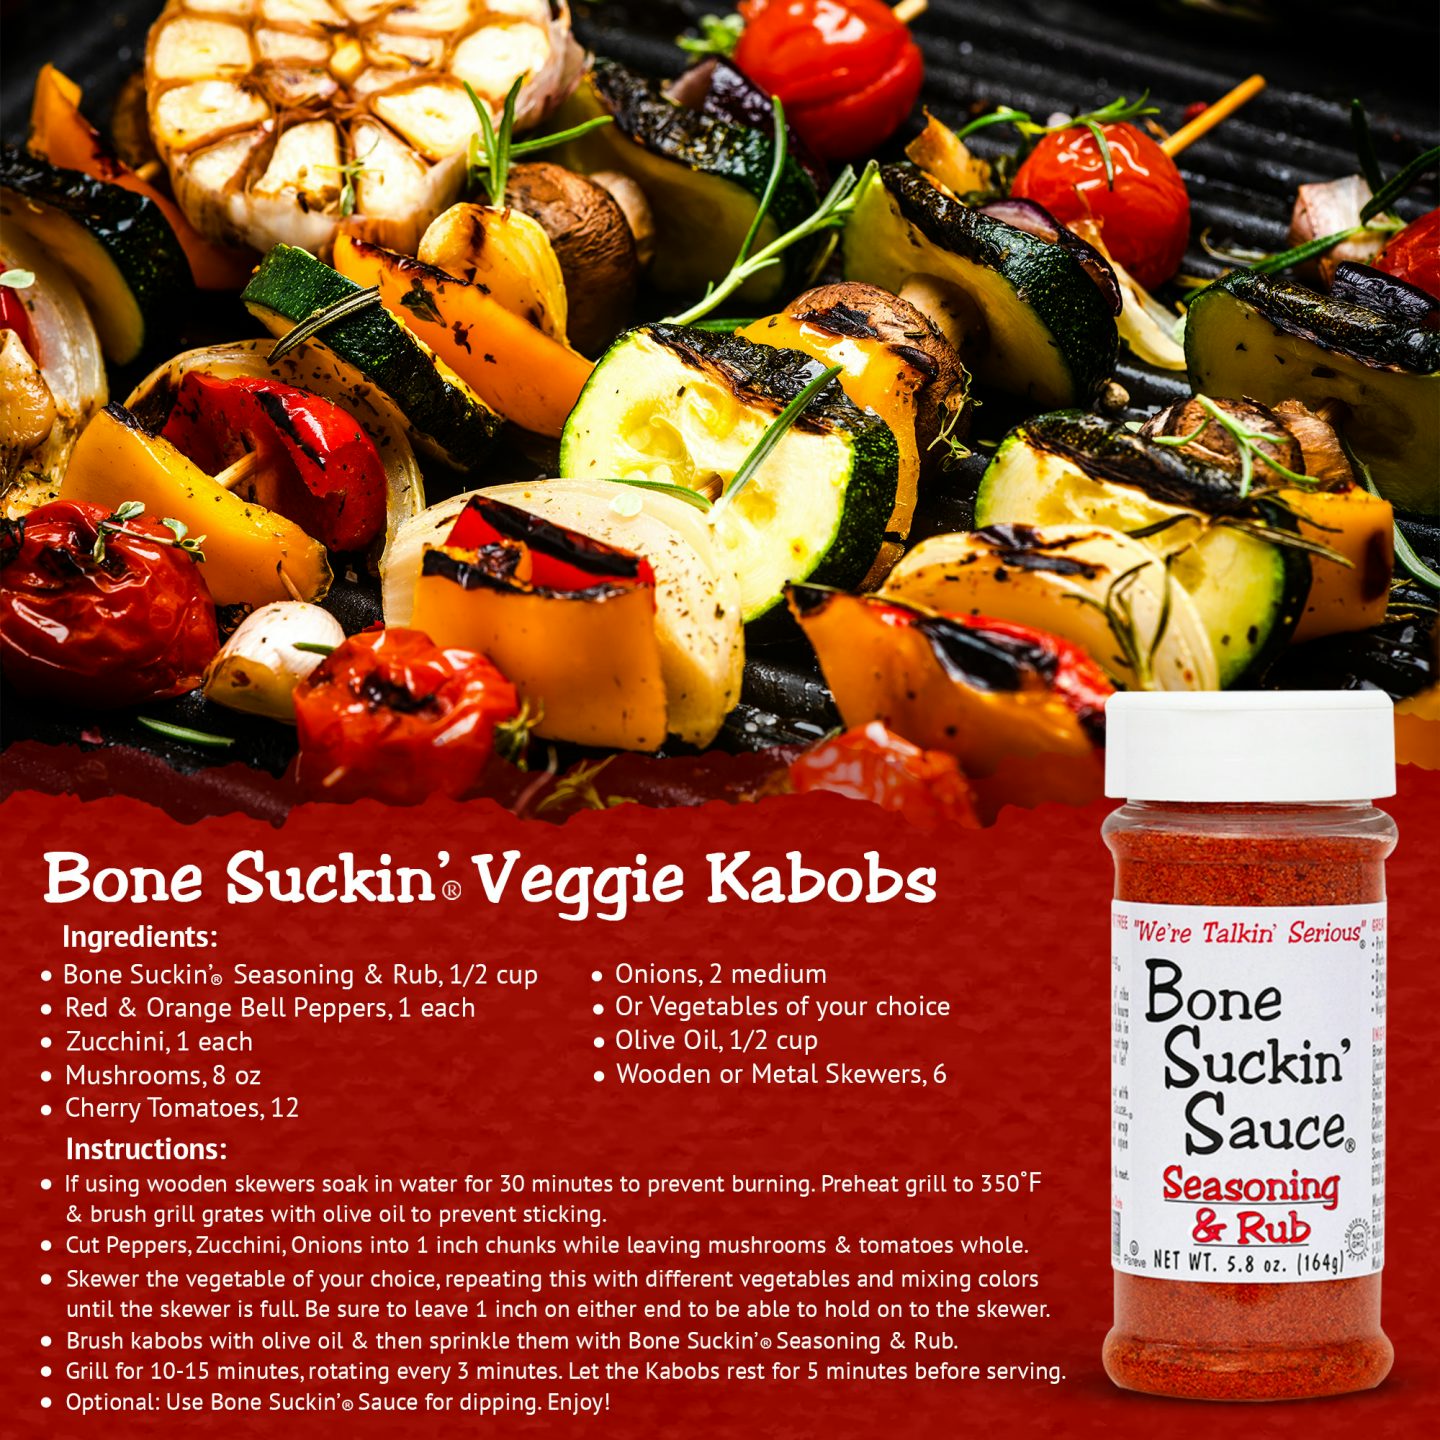 Bone Suckin' Veggie Kabobs Recipe.   Ingredients: Bone Suckin'Seasoning & Rub, 1/2 Cup,Red and Orange Bell Peppers, 1 each, Zucchini, 1, Mushrooms, 8 oz, Cherry Tomatoes, 12, Onion, 2 medium, Olive Oil, 1/2 cup, Skewers, 6.  Instructions: Preheat grill to 350°F and brush grates with olive oil. Cut veggies into 1" chunks leaving mushrooms and tomatoes whole. Skewer the vegetables. Brush kabobs with olive oil and then sprinkle with seasoning. Grill for 10-15 minutes, rotating every 3 minutes. 